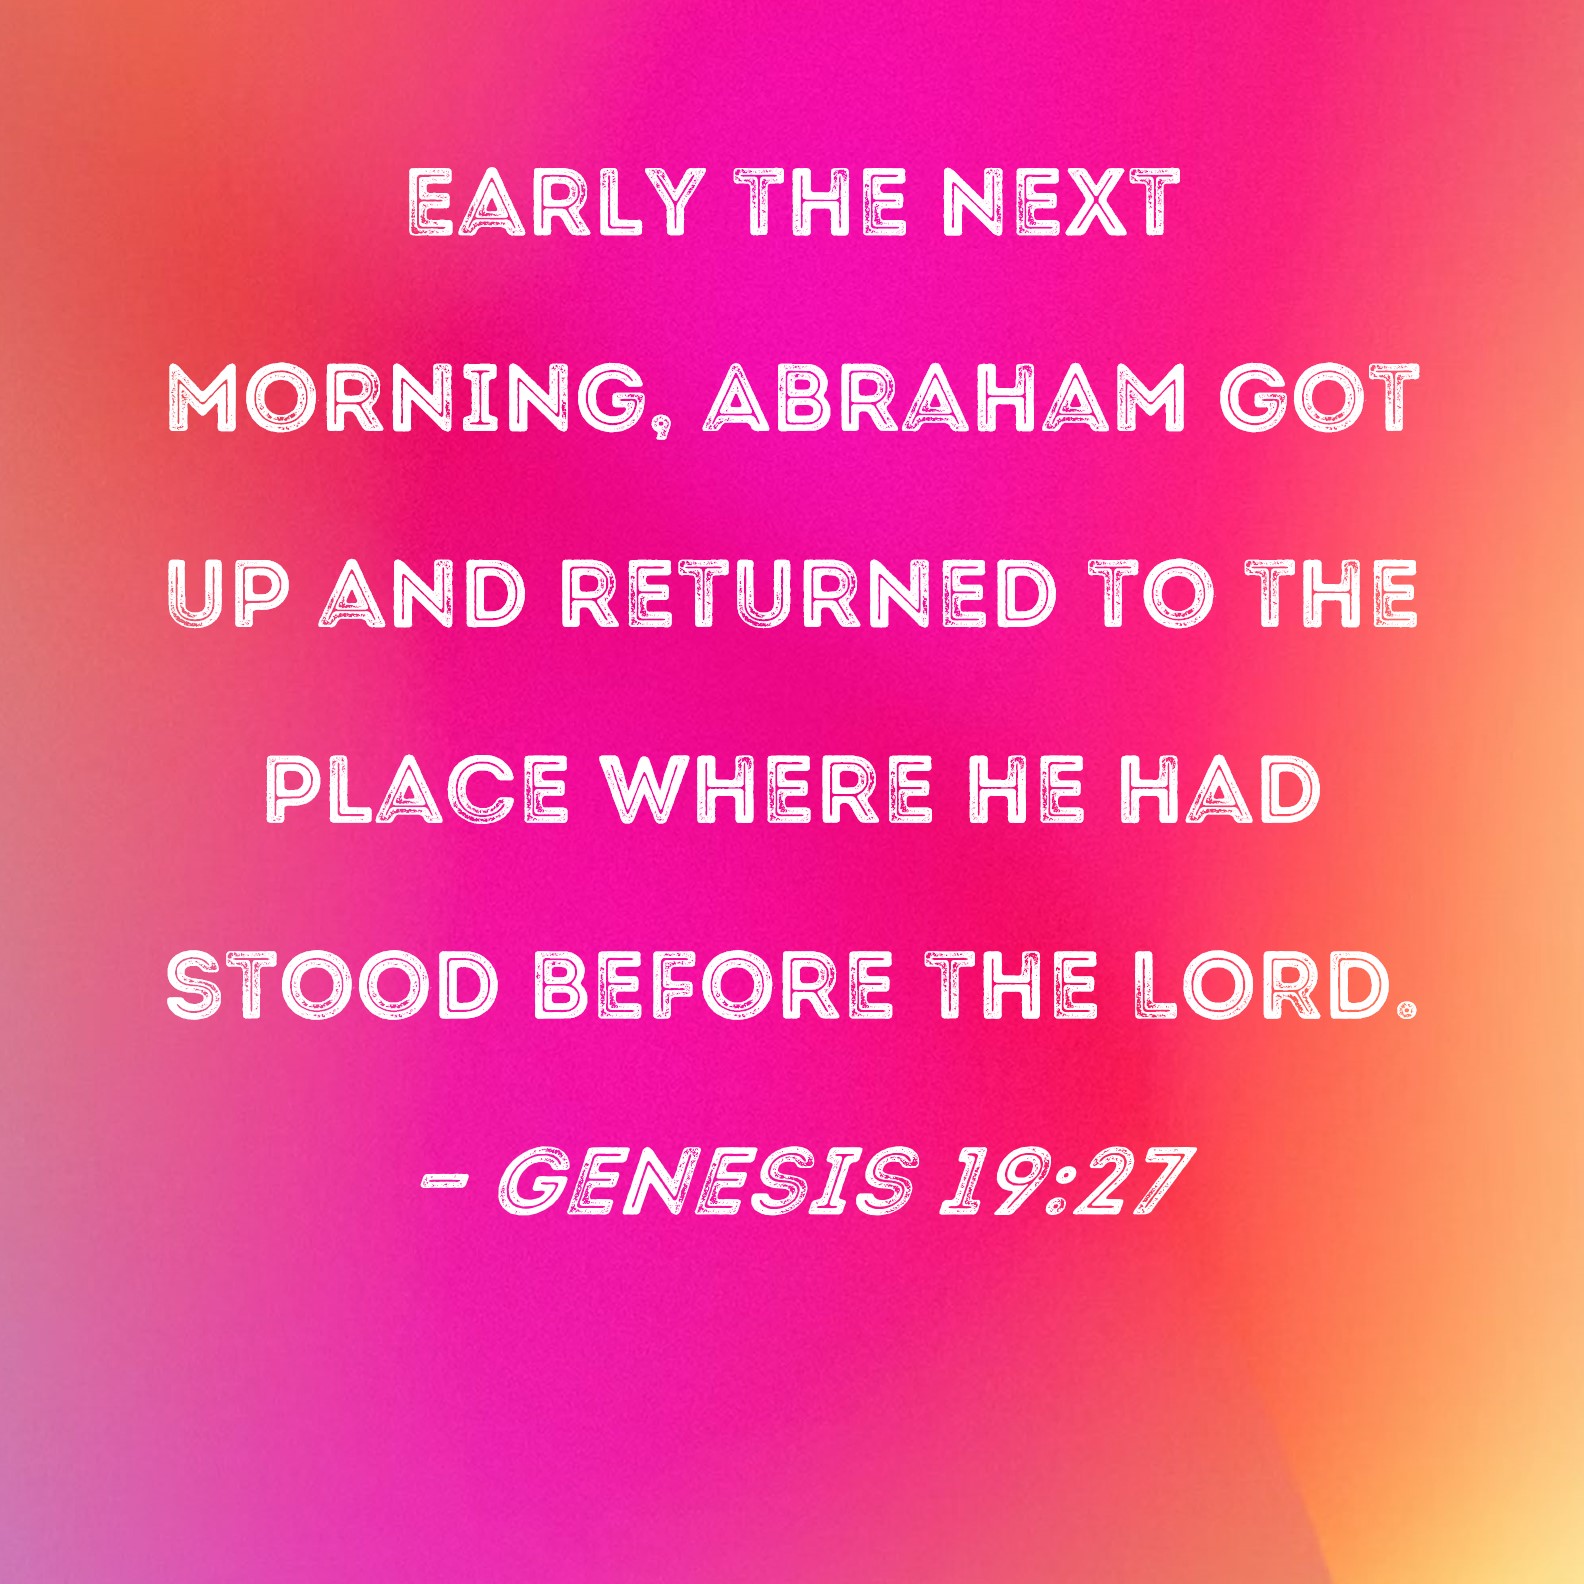 Genesis 19:2 and said, My lords, please turn aside into the house of your  servant; wash your feet and spend the night. Then you can rise early and go  on your way.